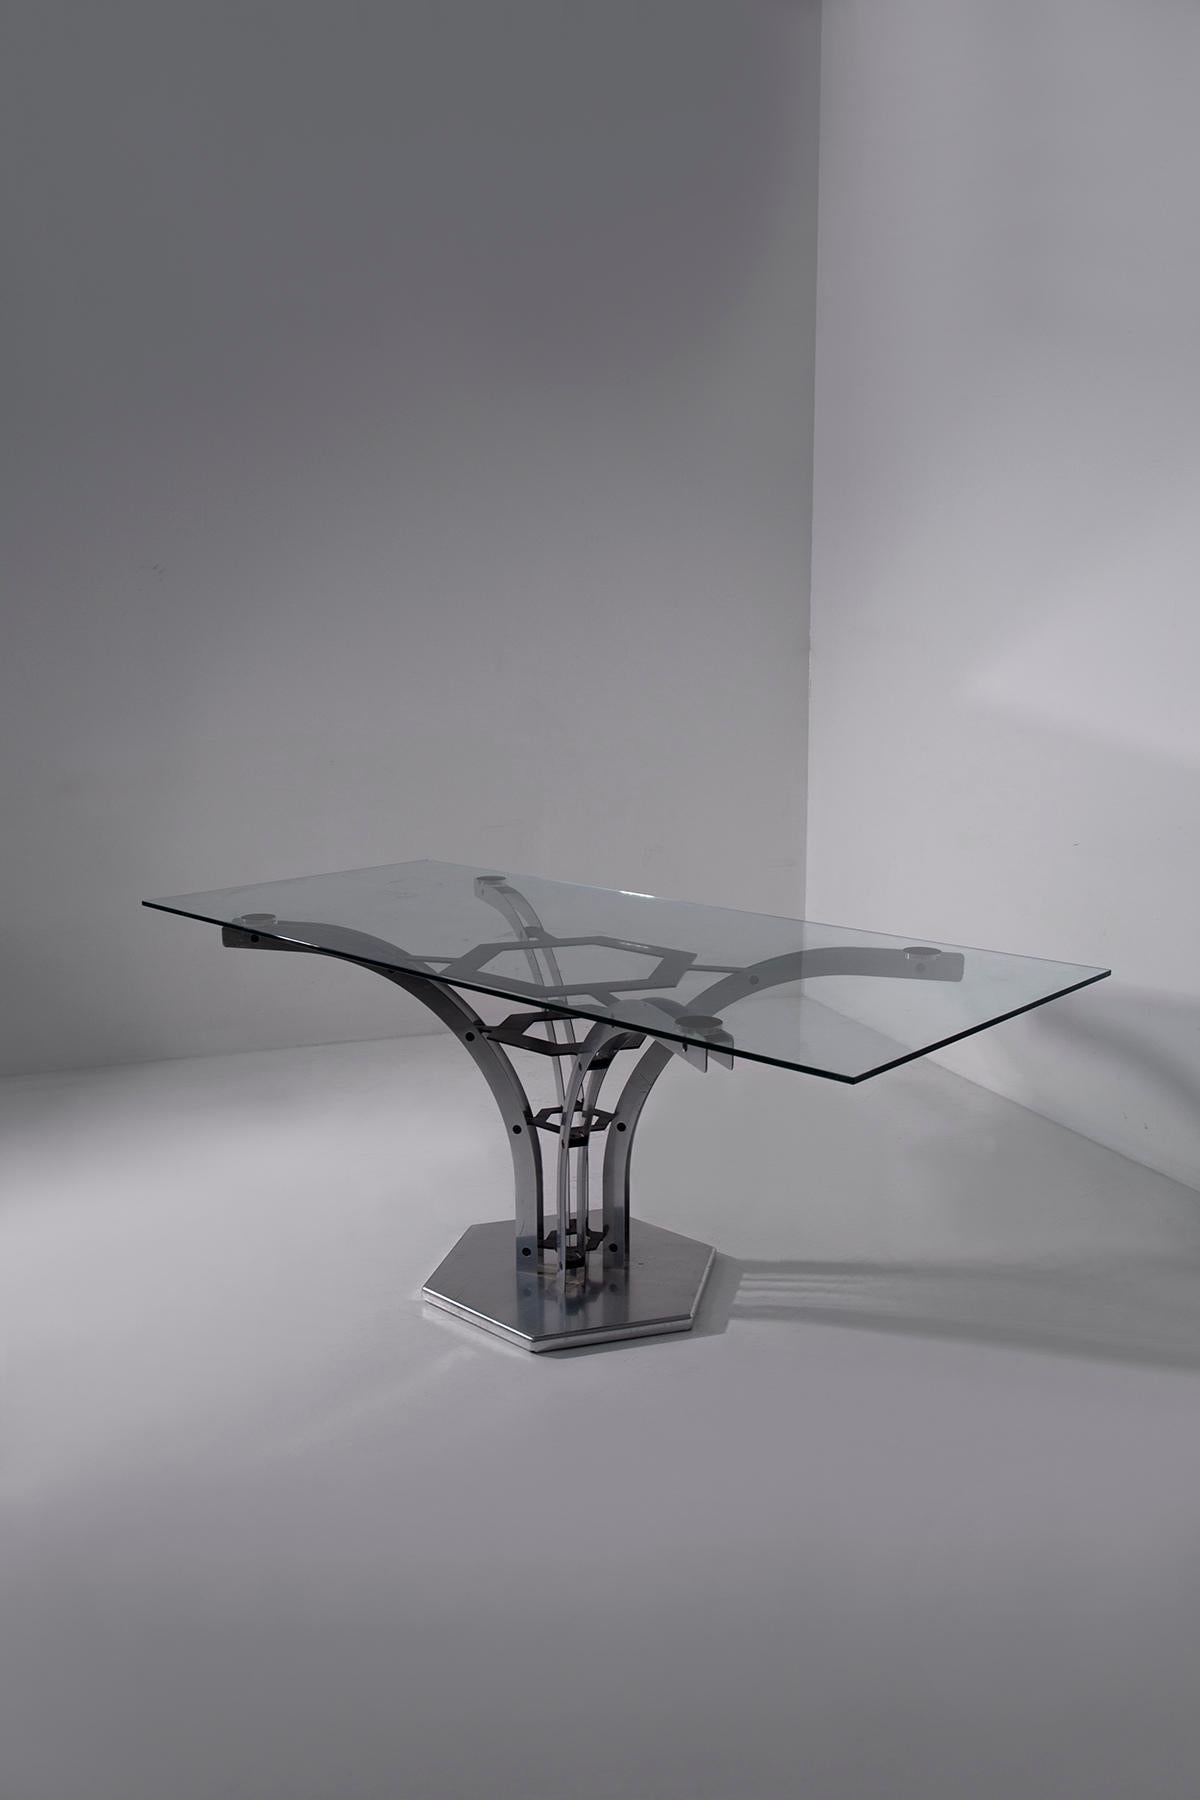 Step into the captivating world of Italian design with this striking geometric table from the 1970s to early 1980s. Its elaborate pedestal boasts a technical precision that commands admiration, inviting you to explore its intricate details.

Divided